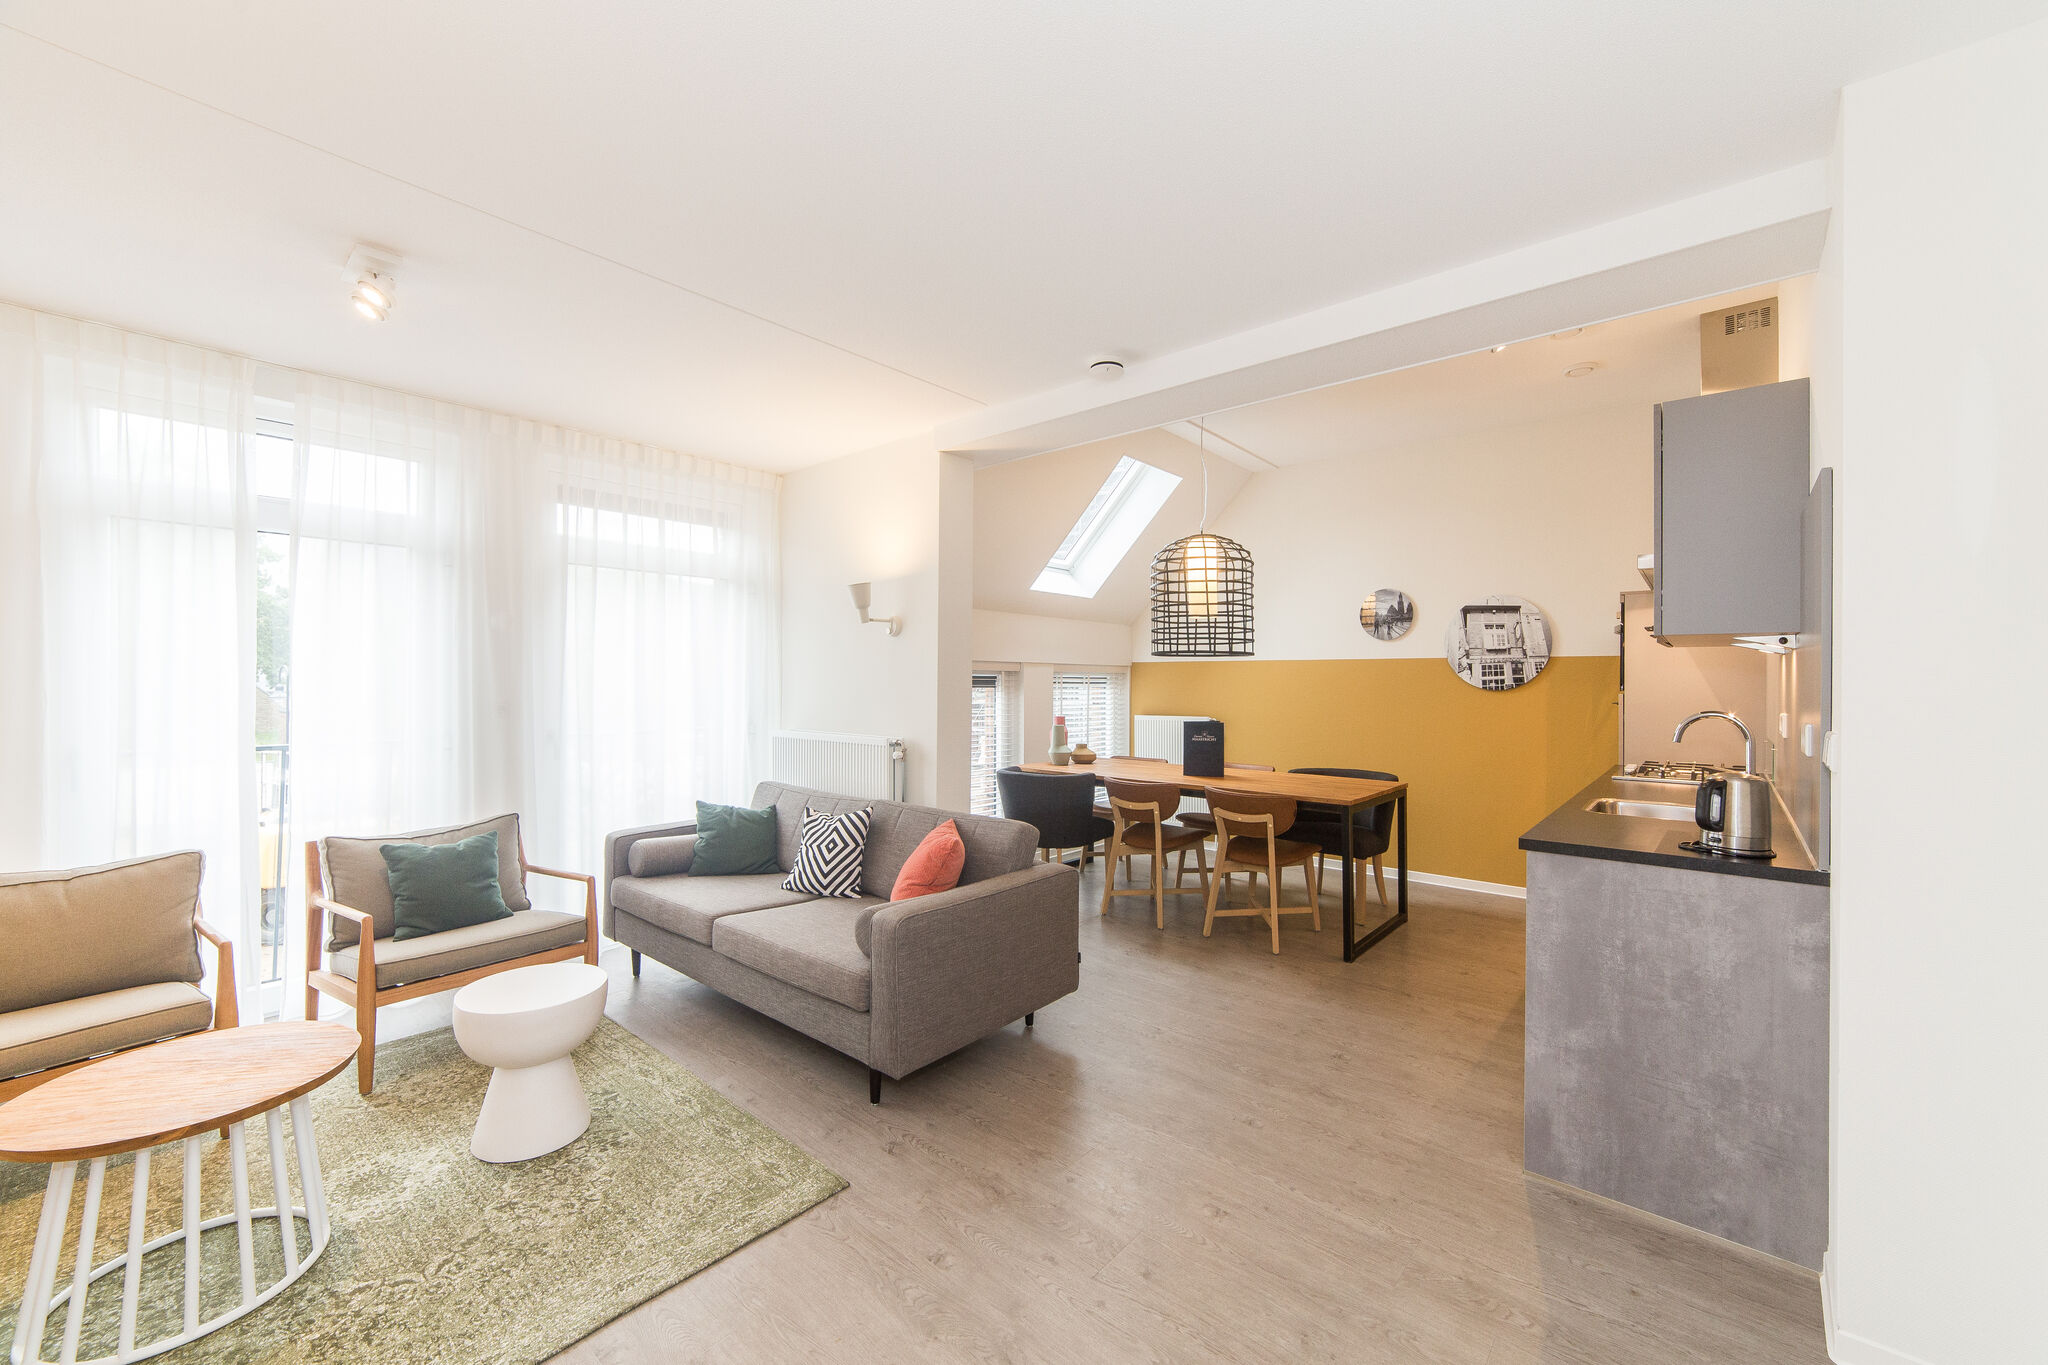 Modern apartment, at 4 km. from Maastricht